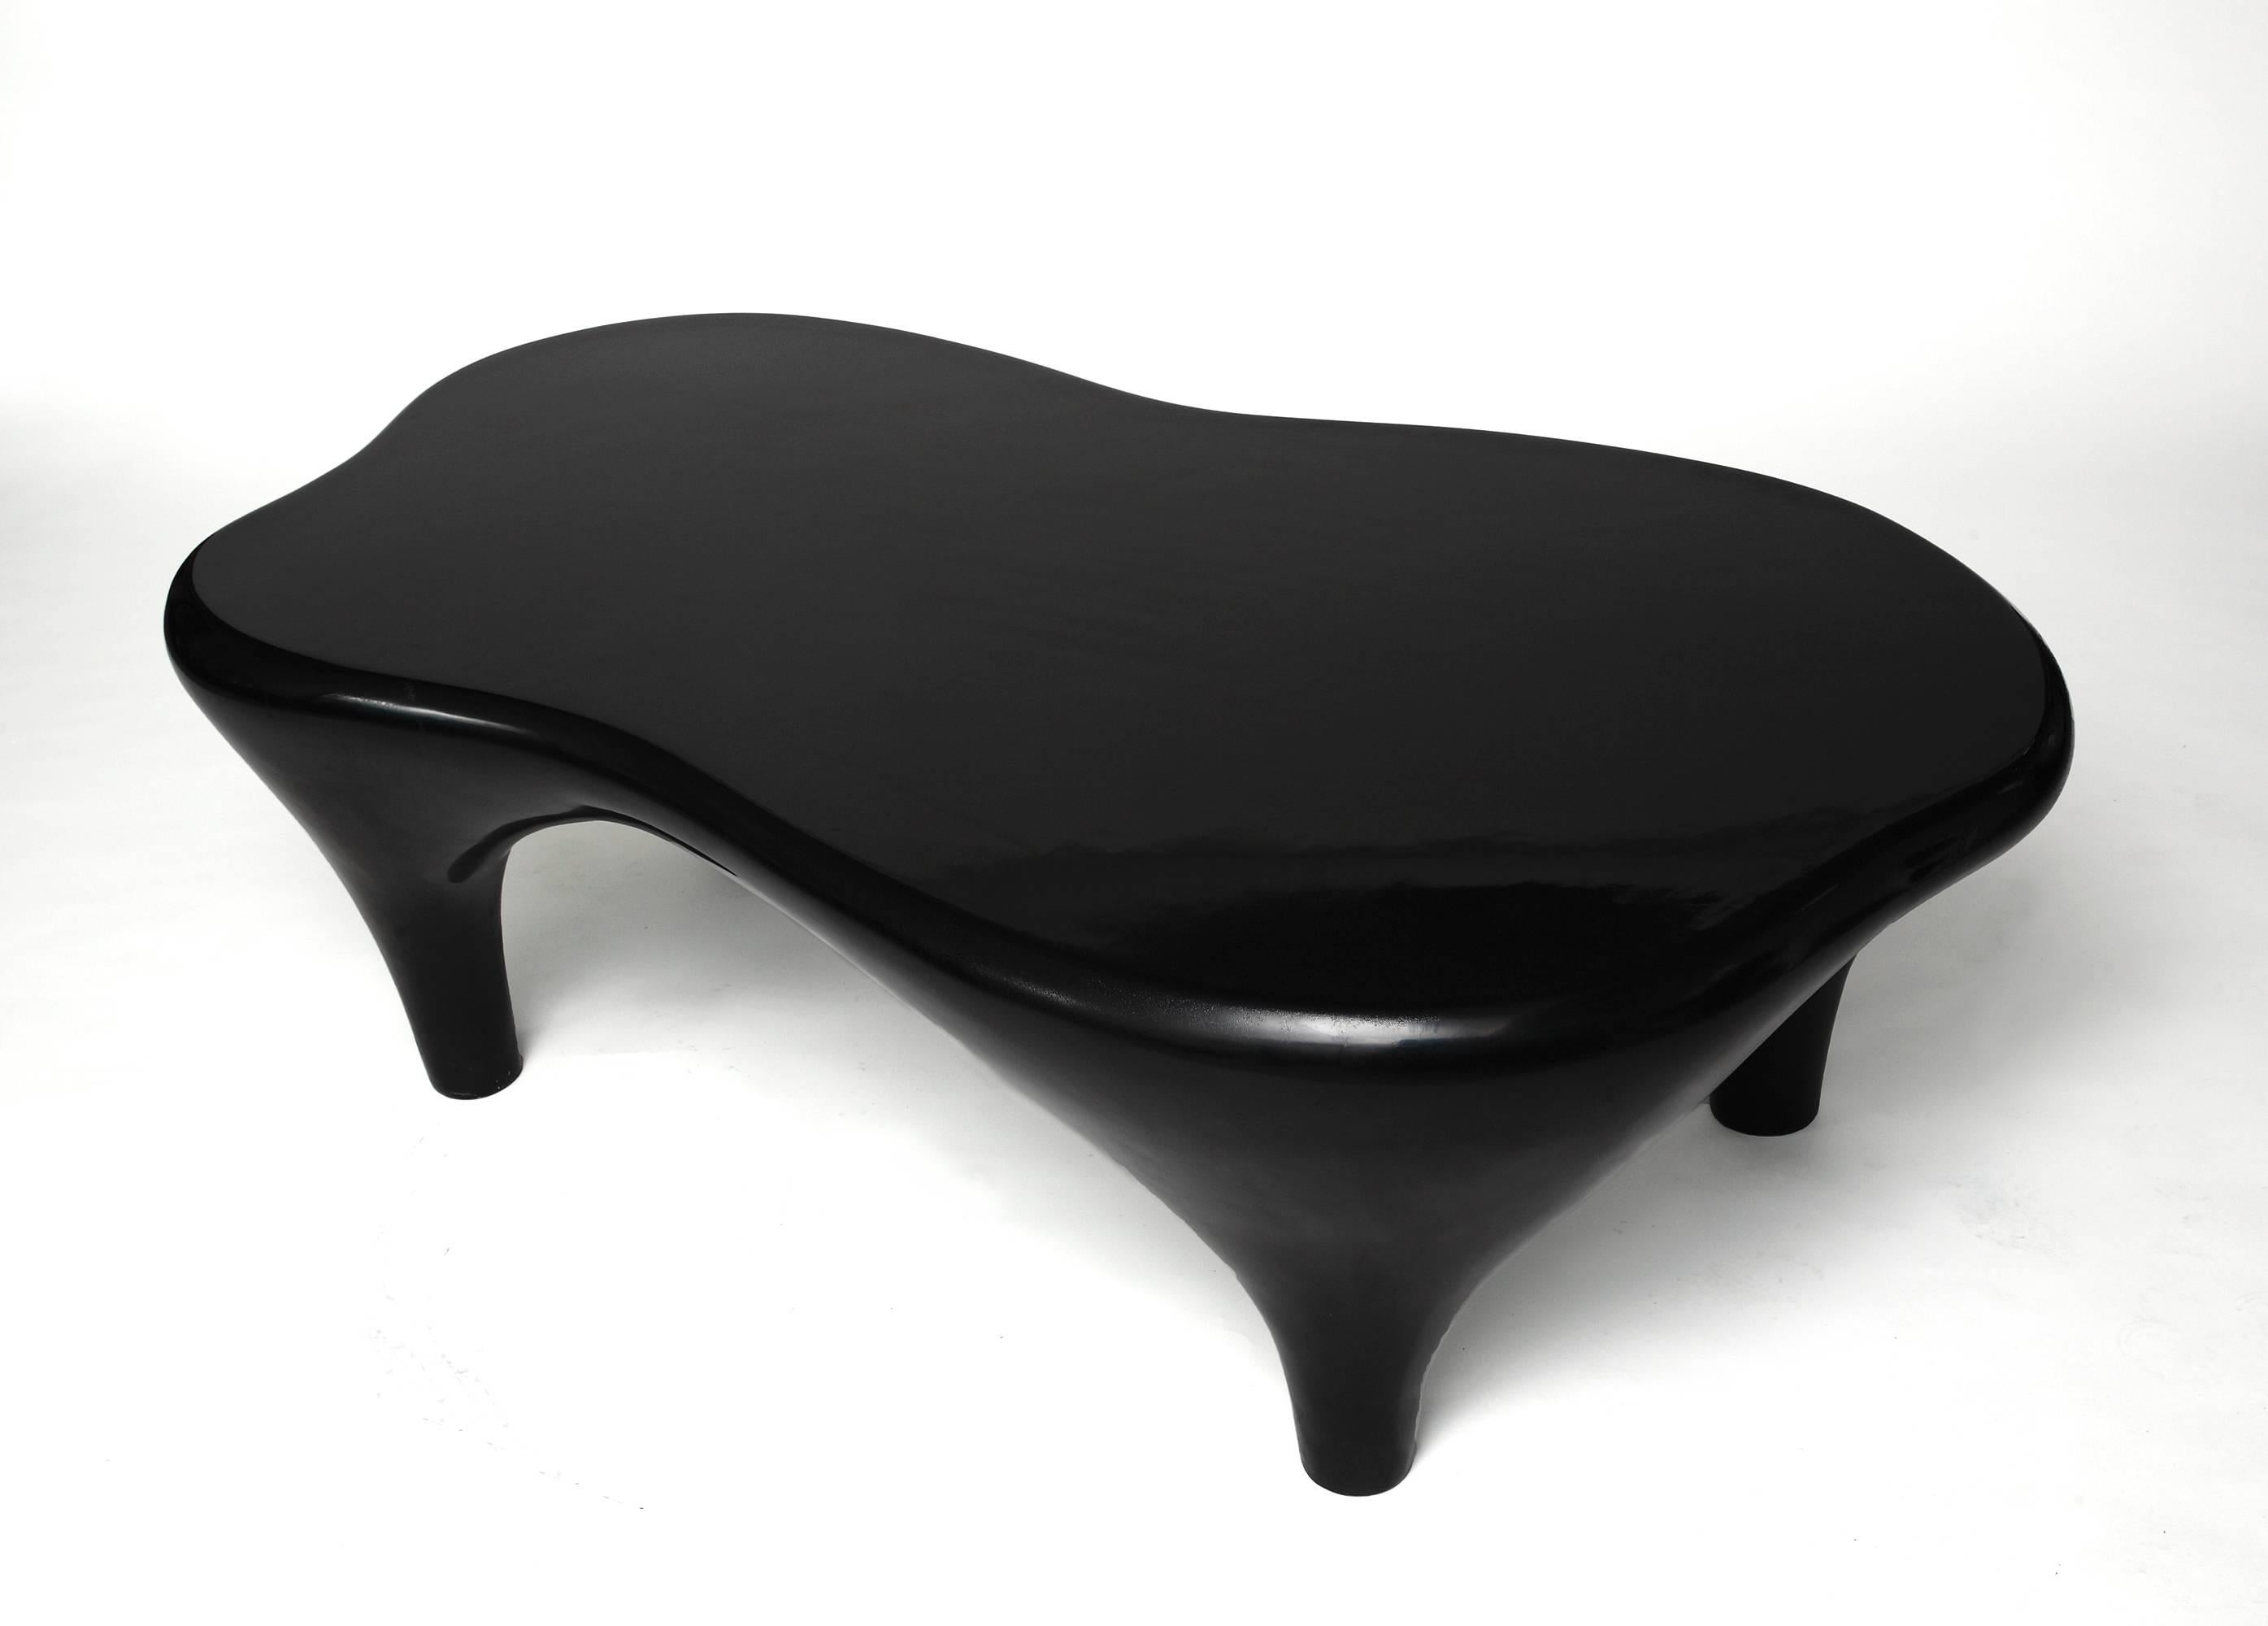 Sculpture or coffee table by Jacques Jarrige finished in hand lacquer.
Jacques Jarrige is a sculptor living and working in Paris. His Toro coffee table with its curvaceous undulating rounded edges and swelling legs feel in perpetual